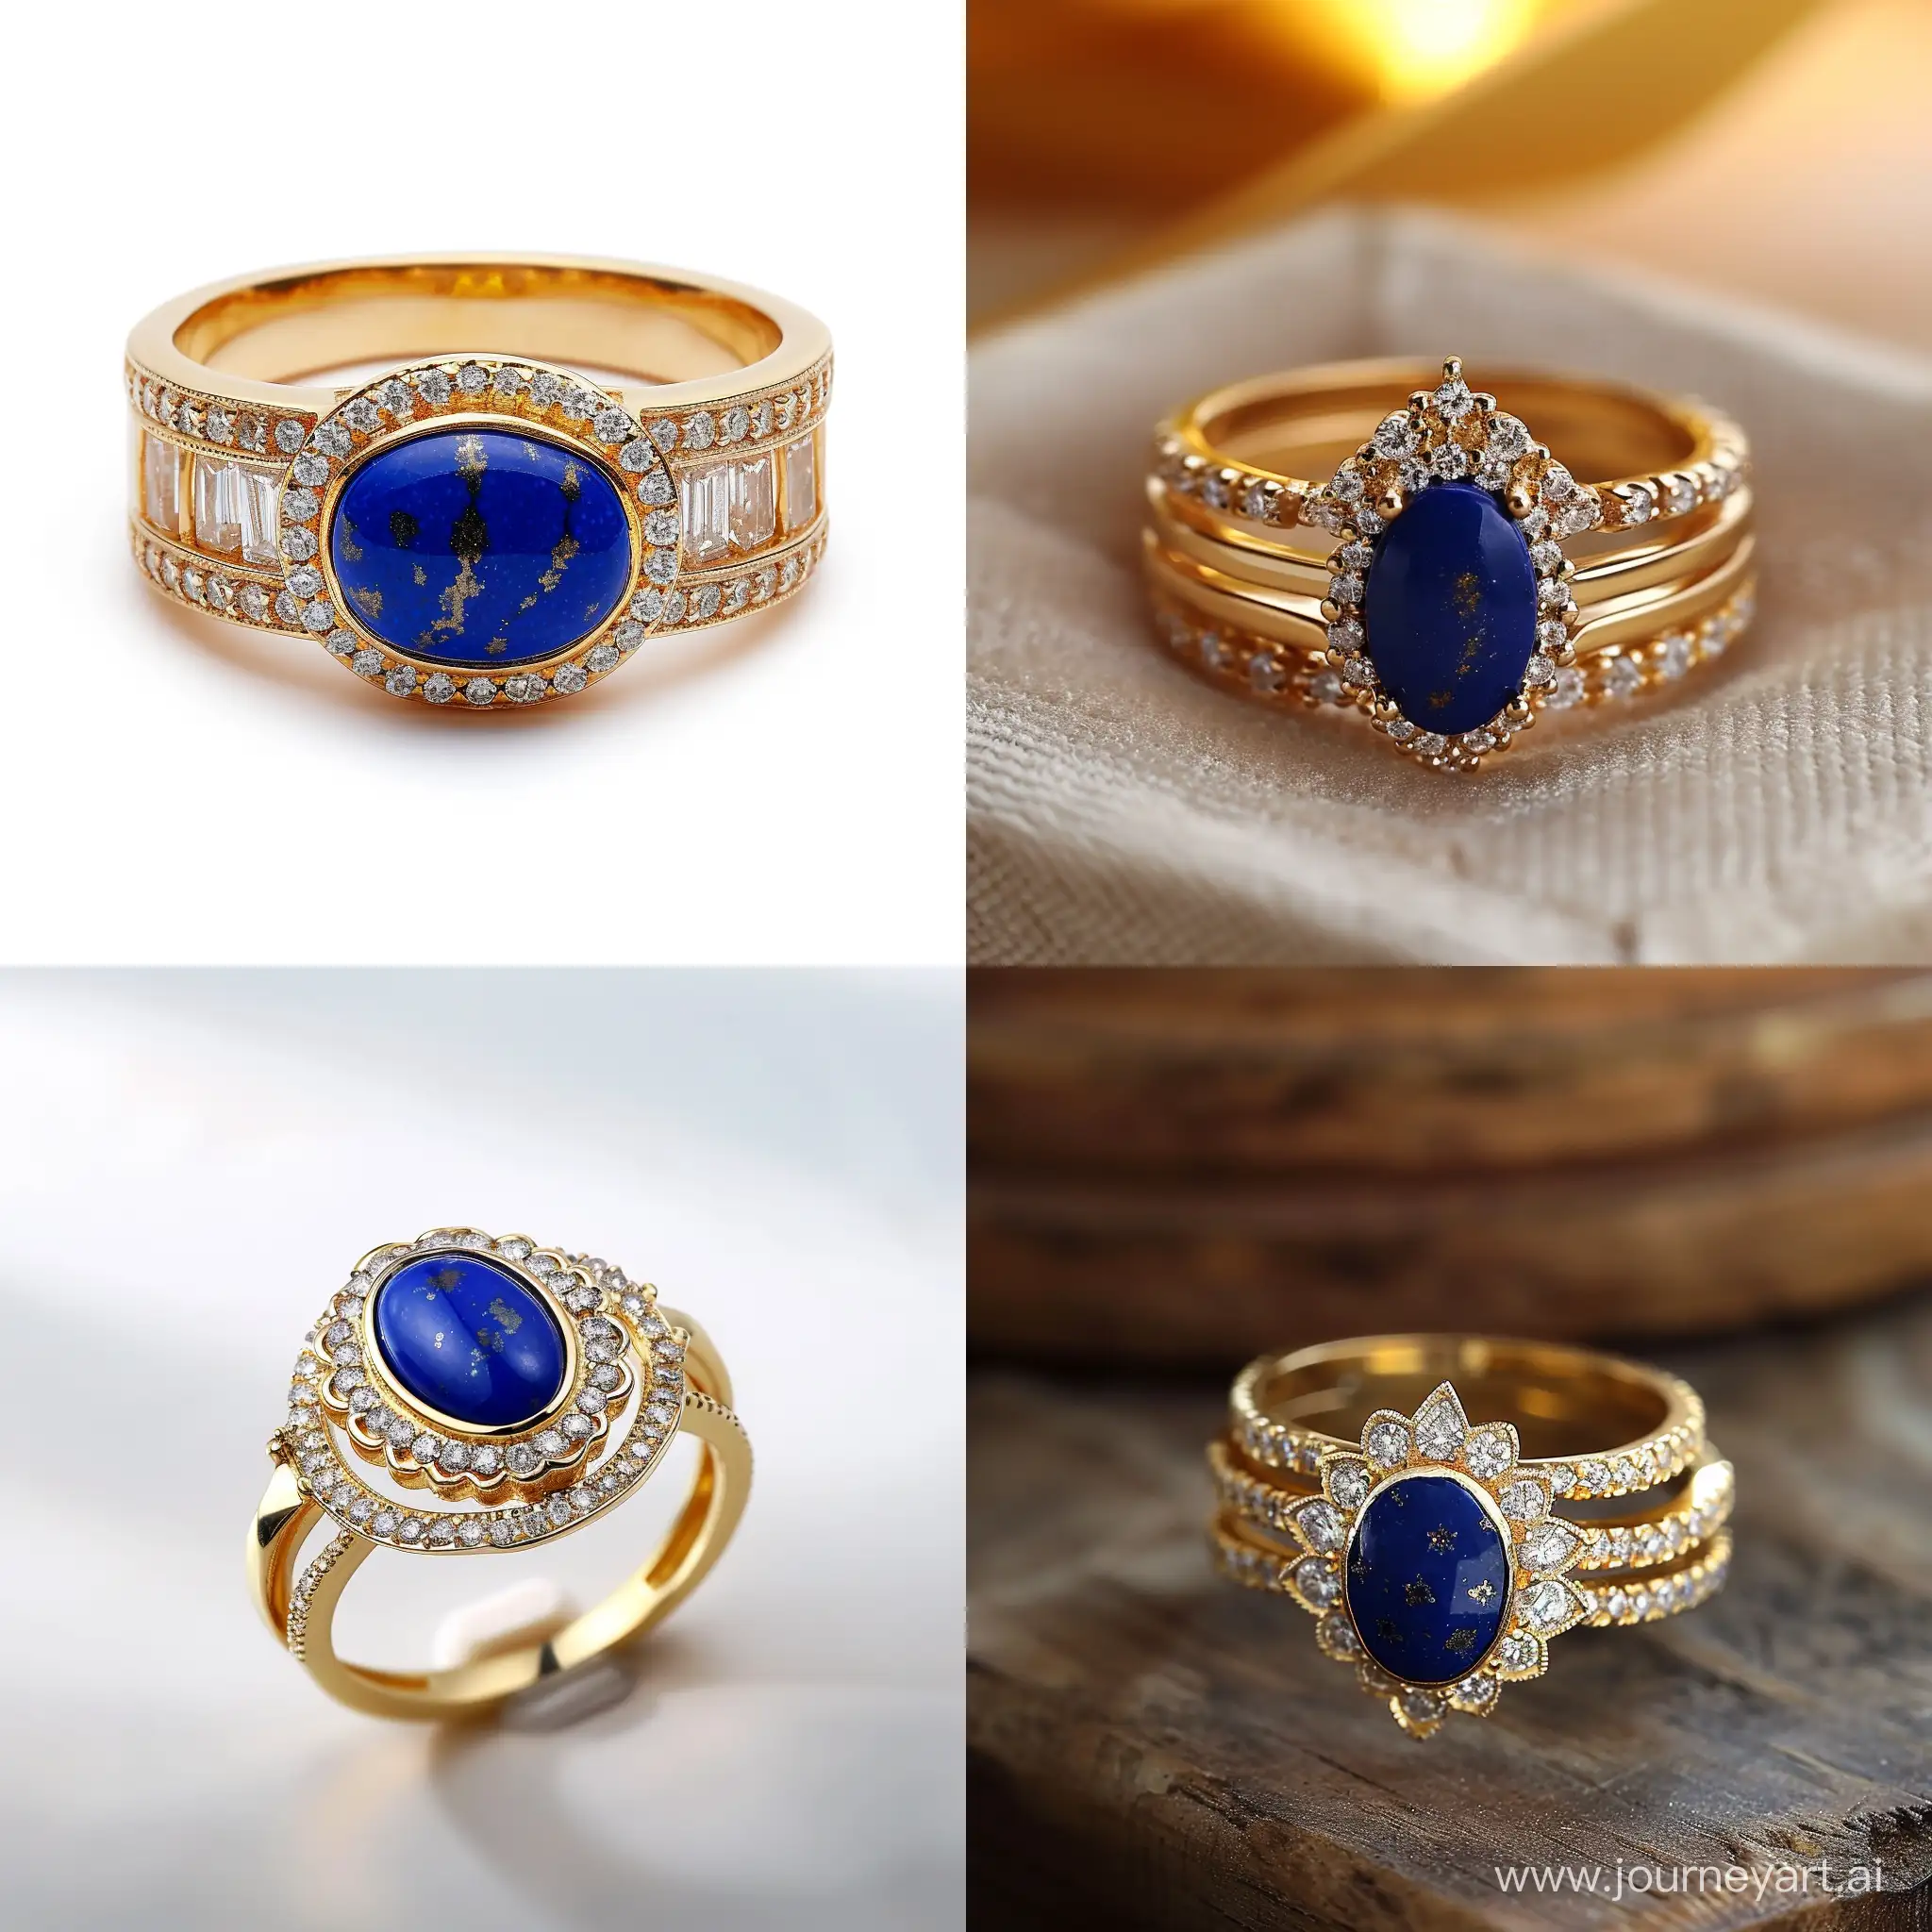 Art-Deco-Style-Gold-Ring-with-Oval-Cut-Lapis-Lazuli-and-Diamonds